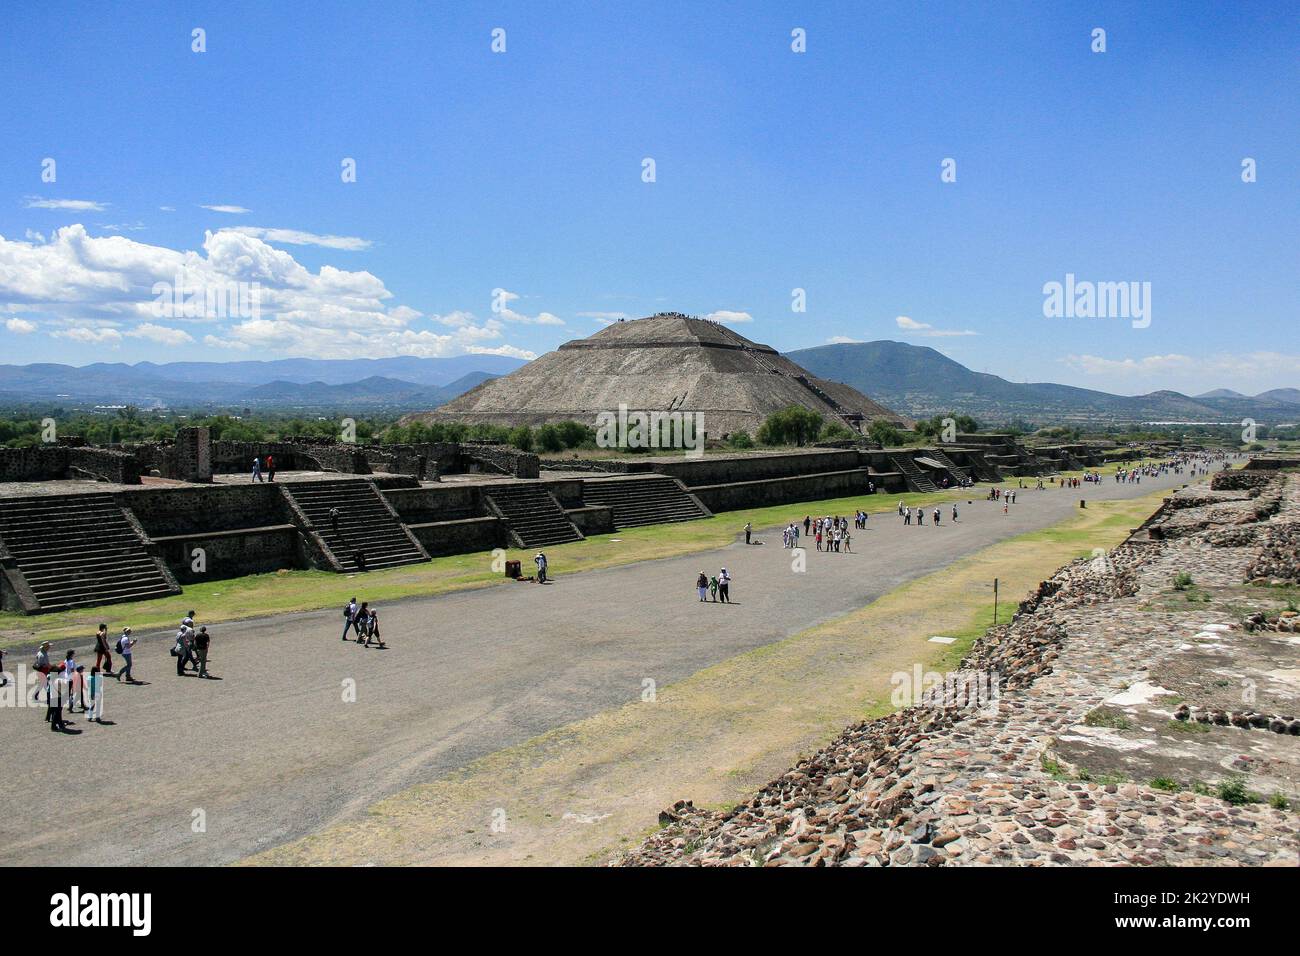 Theotihuacan - Mexico, 04 25 2010: General view of the ancient city of theotihuacan in Mexico Stock Photo